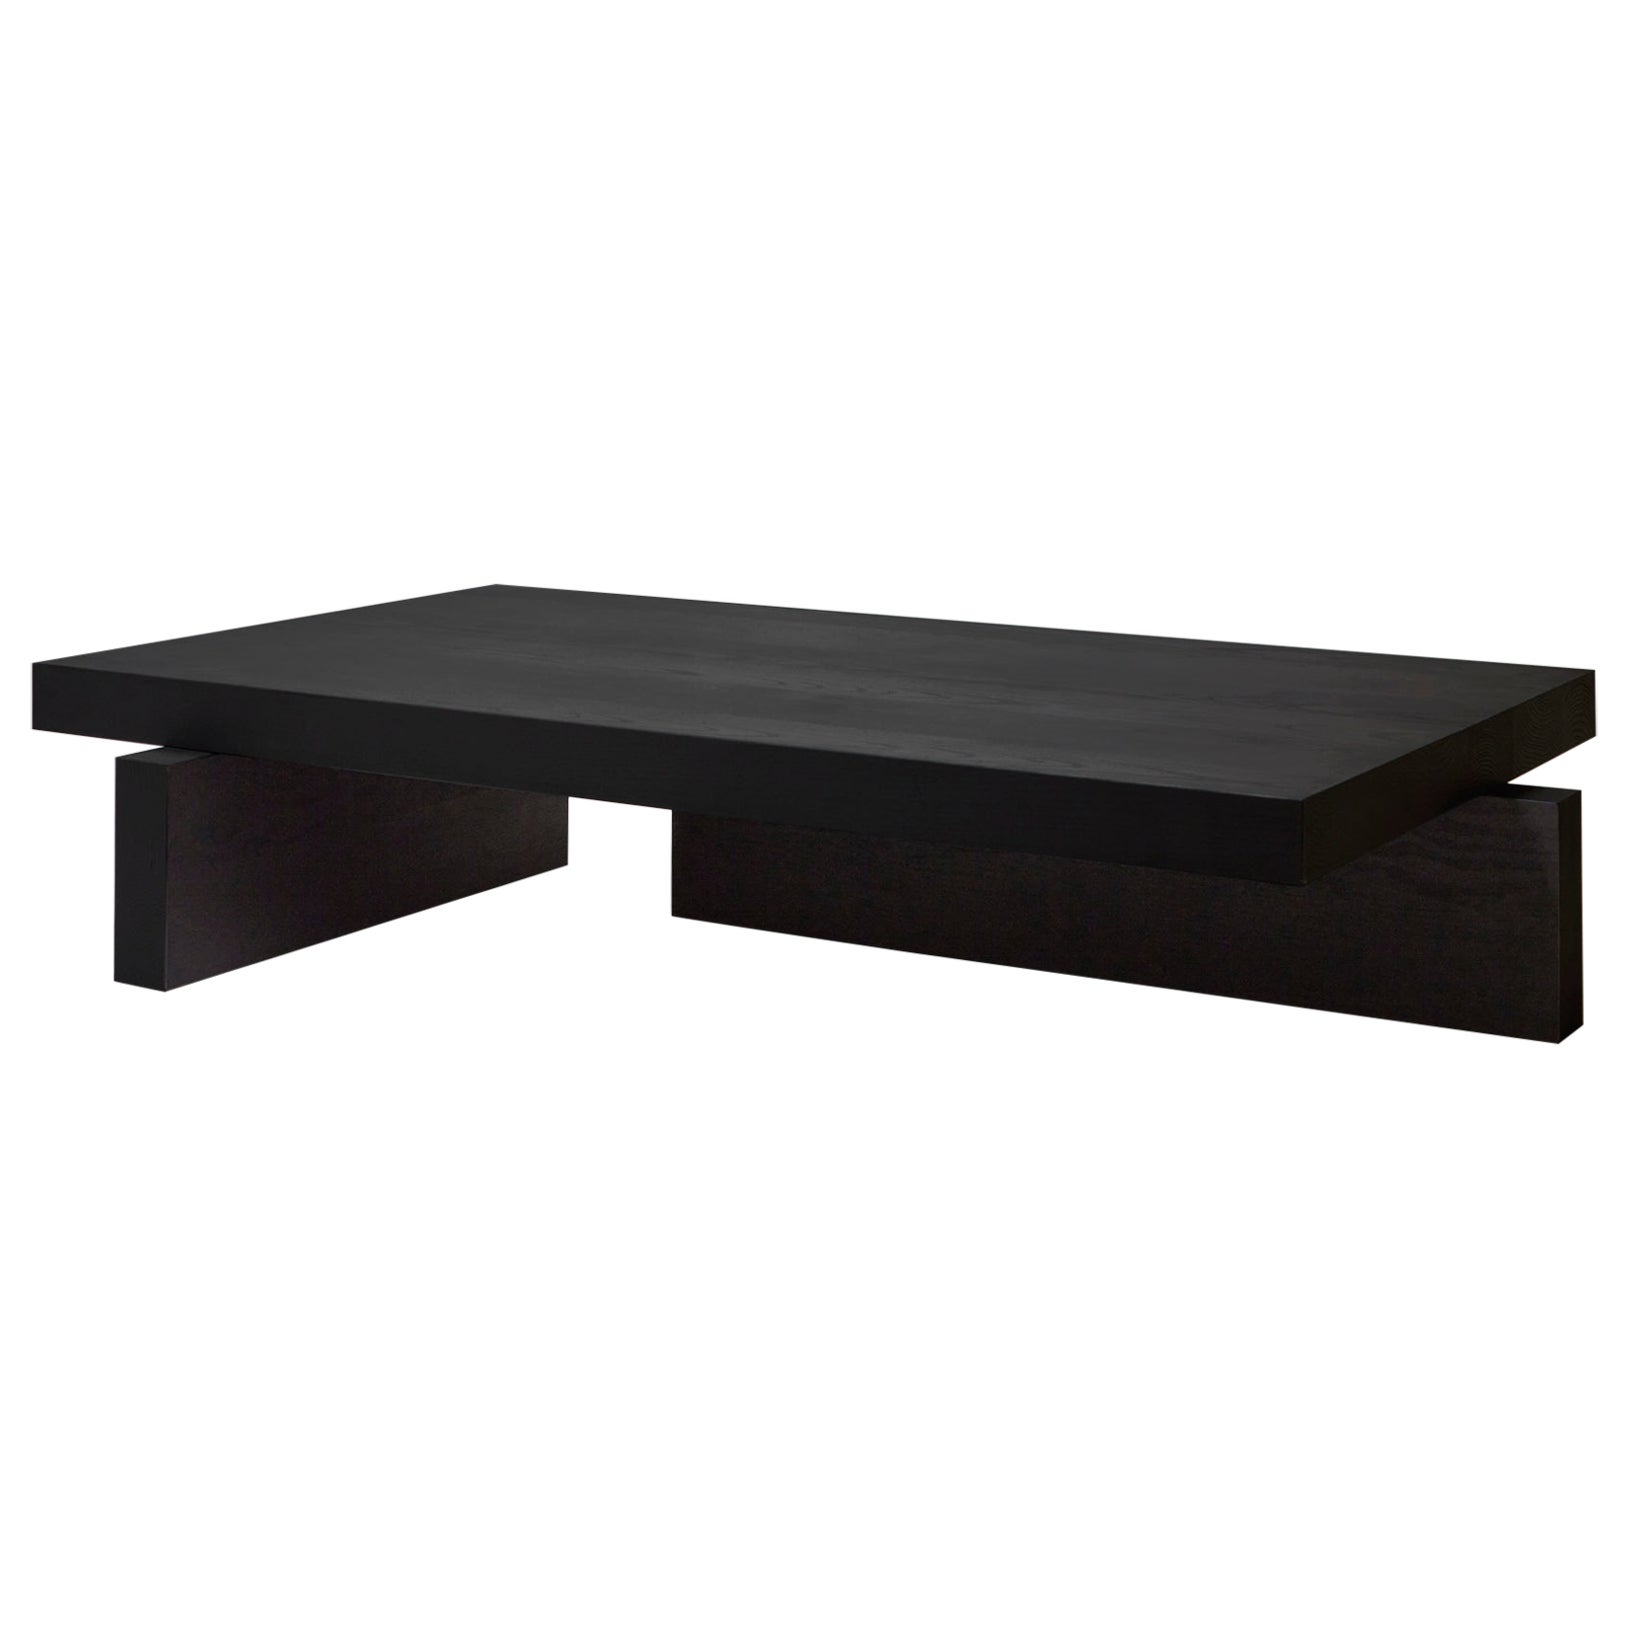 Architectural Solid Oak Wooden Hari Coffee Table